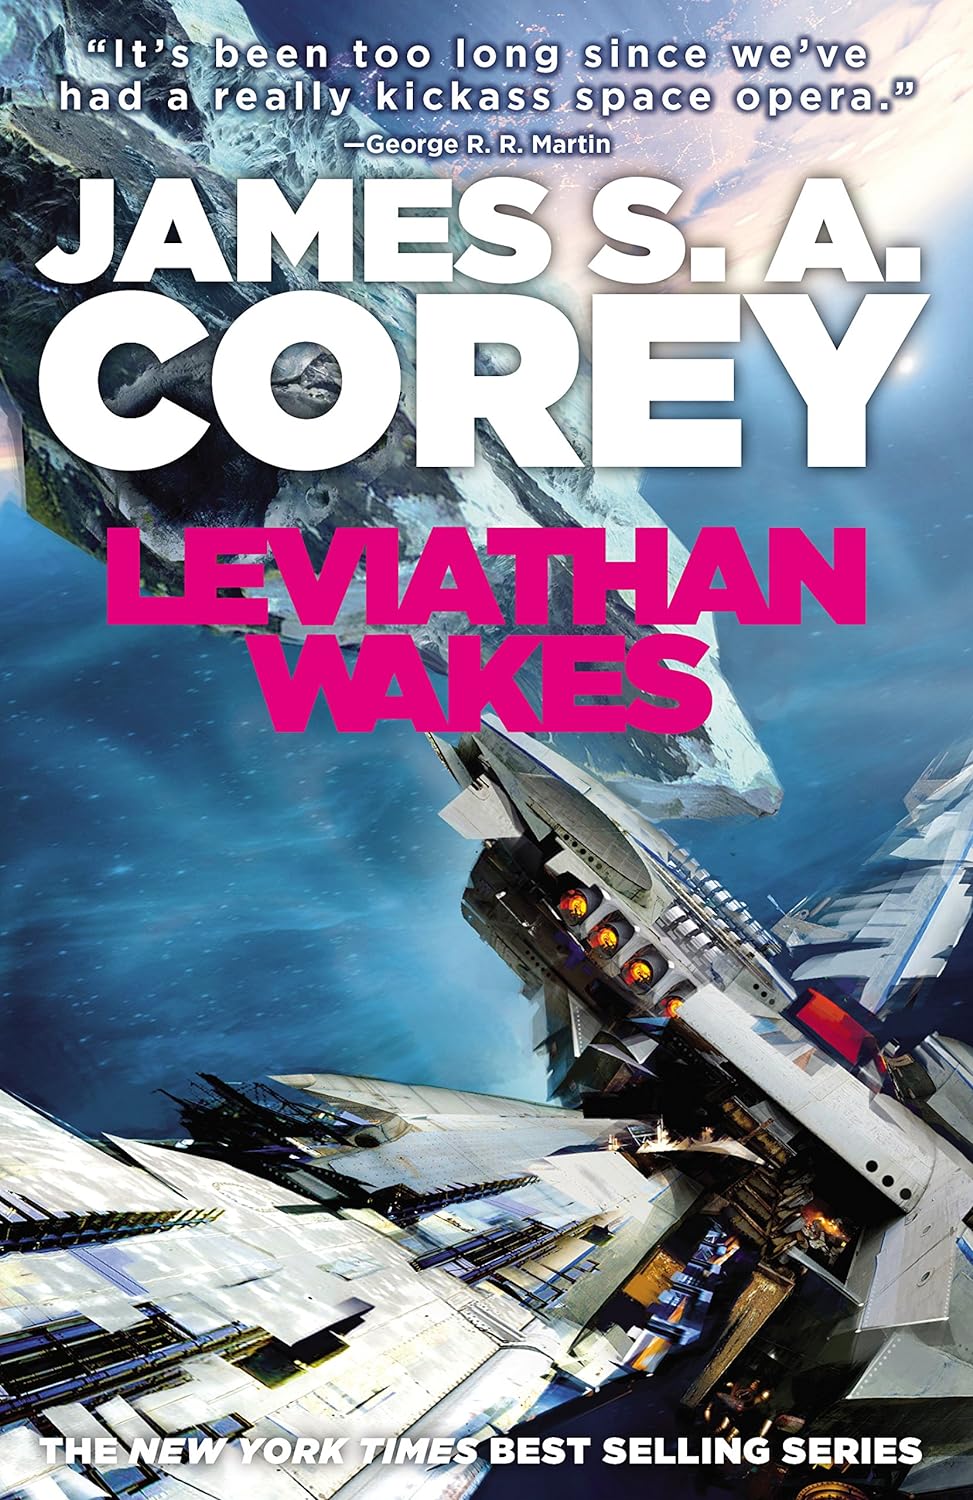 Leviathan Wakes - James S.A. Corey (Pre-Loved)